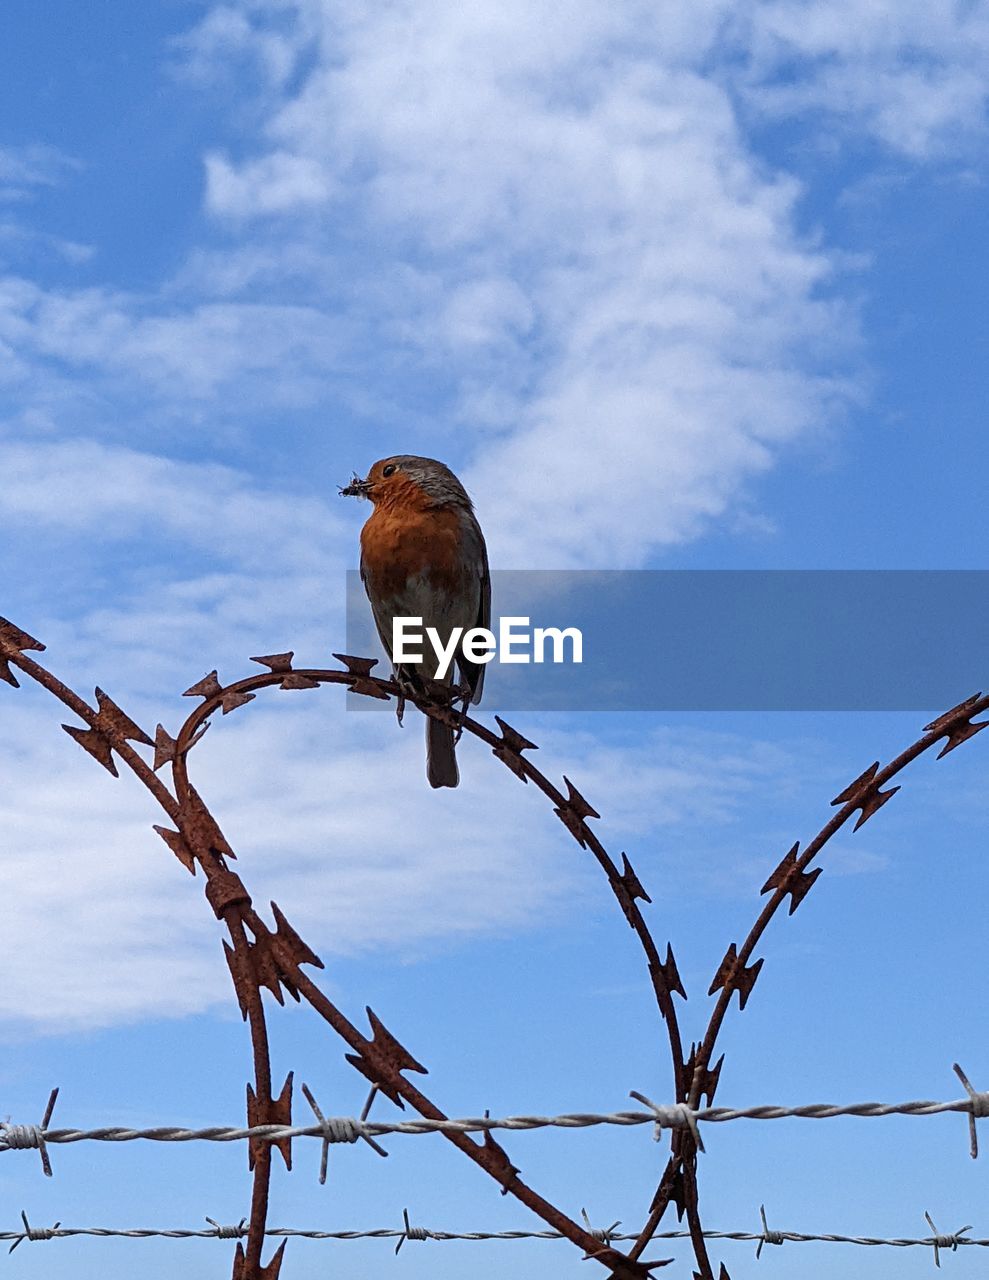 bird, animal, animal themes, animal wildlife, wildlife, sky, nature, branch, perching, one animal, no people, fence, cloud, outdoors, day, blue, protection, security